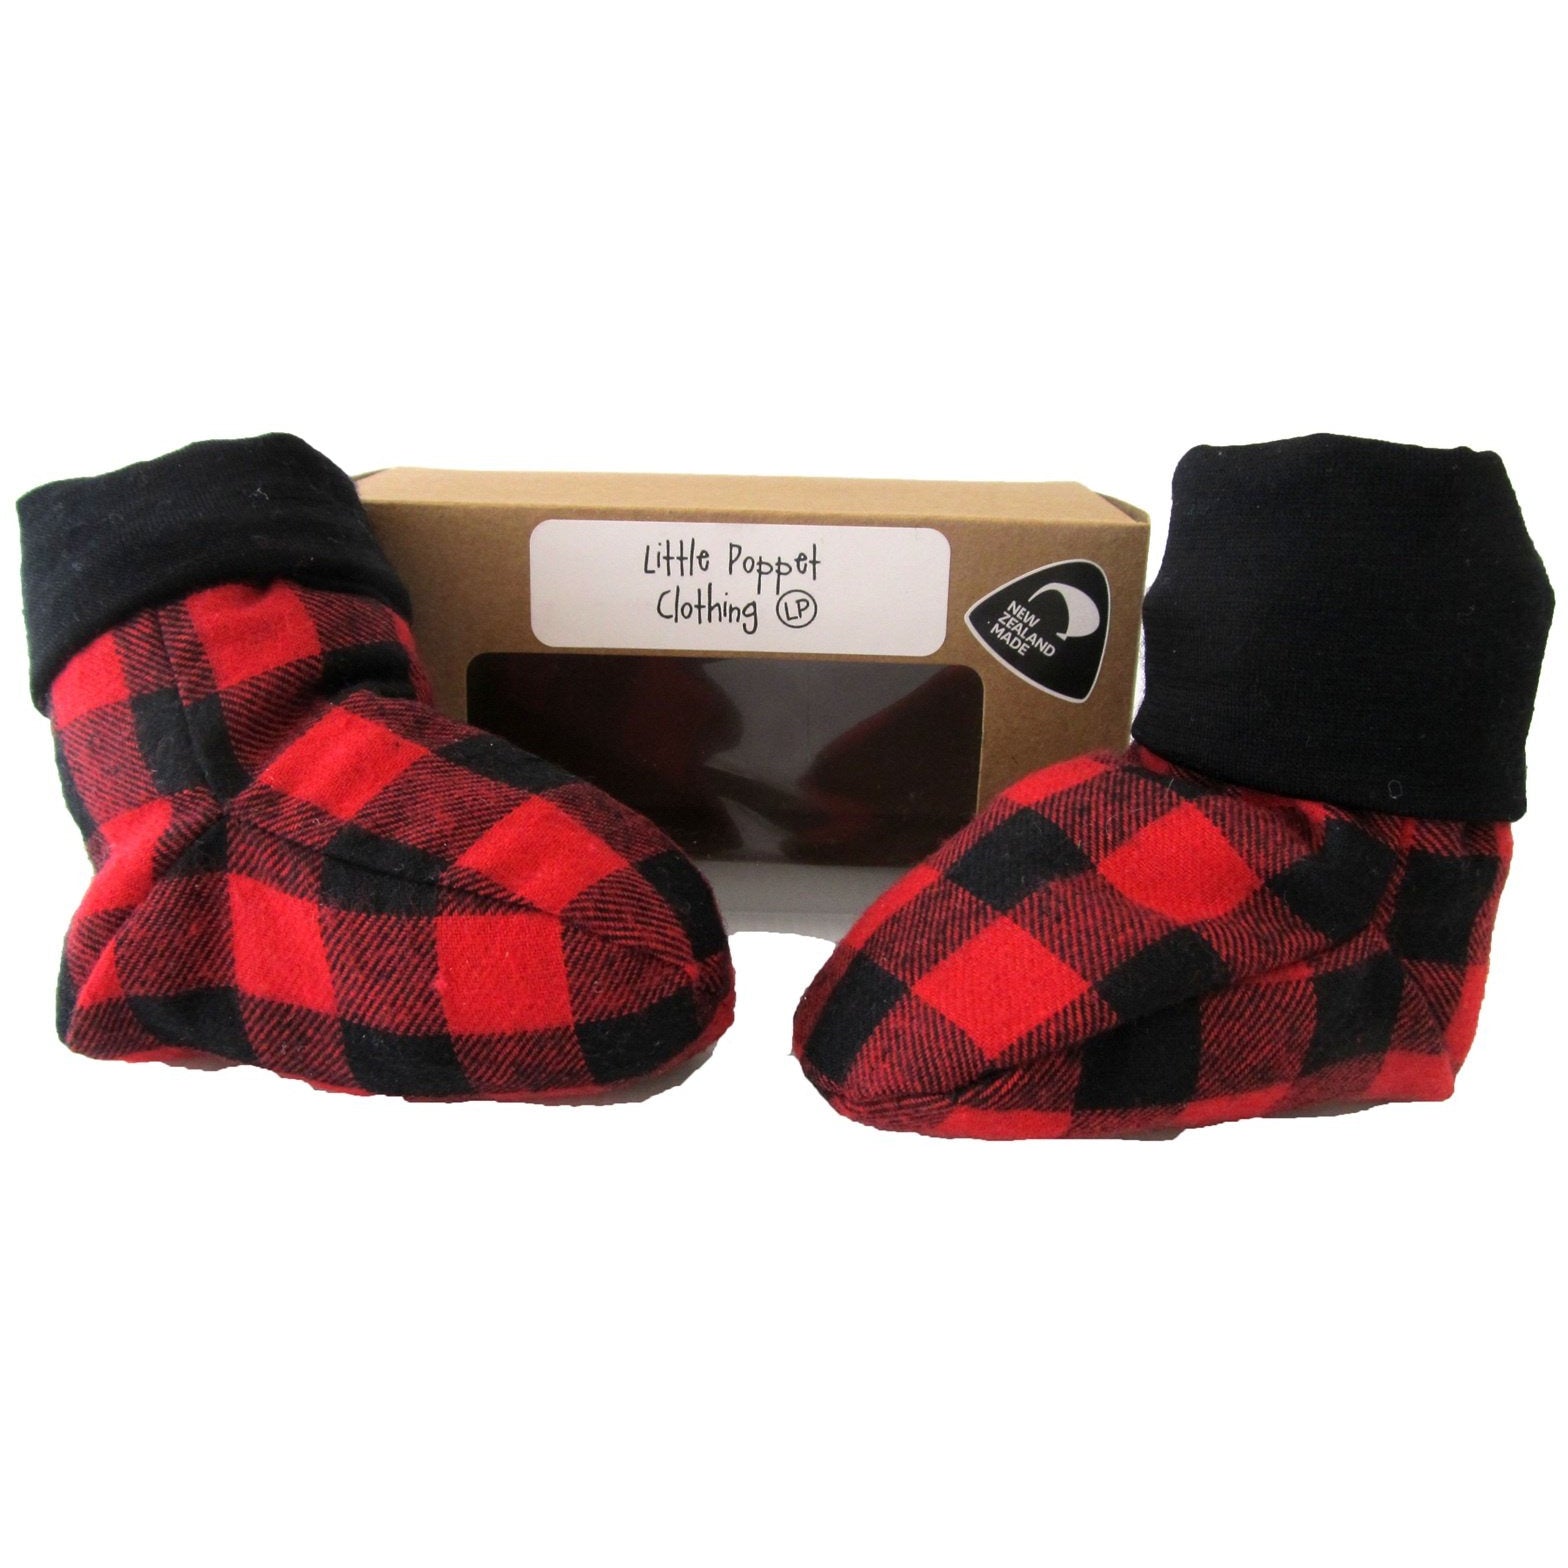 Check Bush Merino Booties - Red Little Poppet Clothing